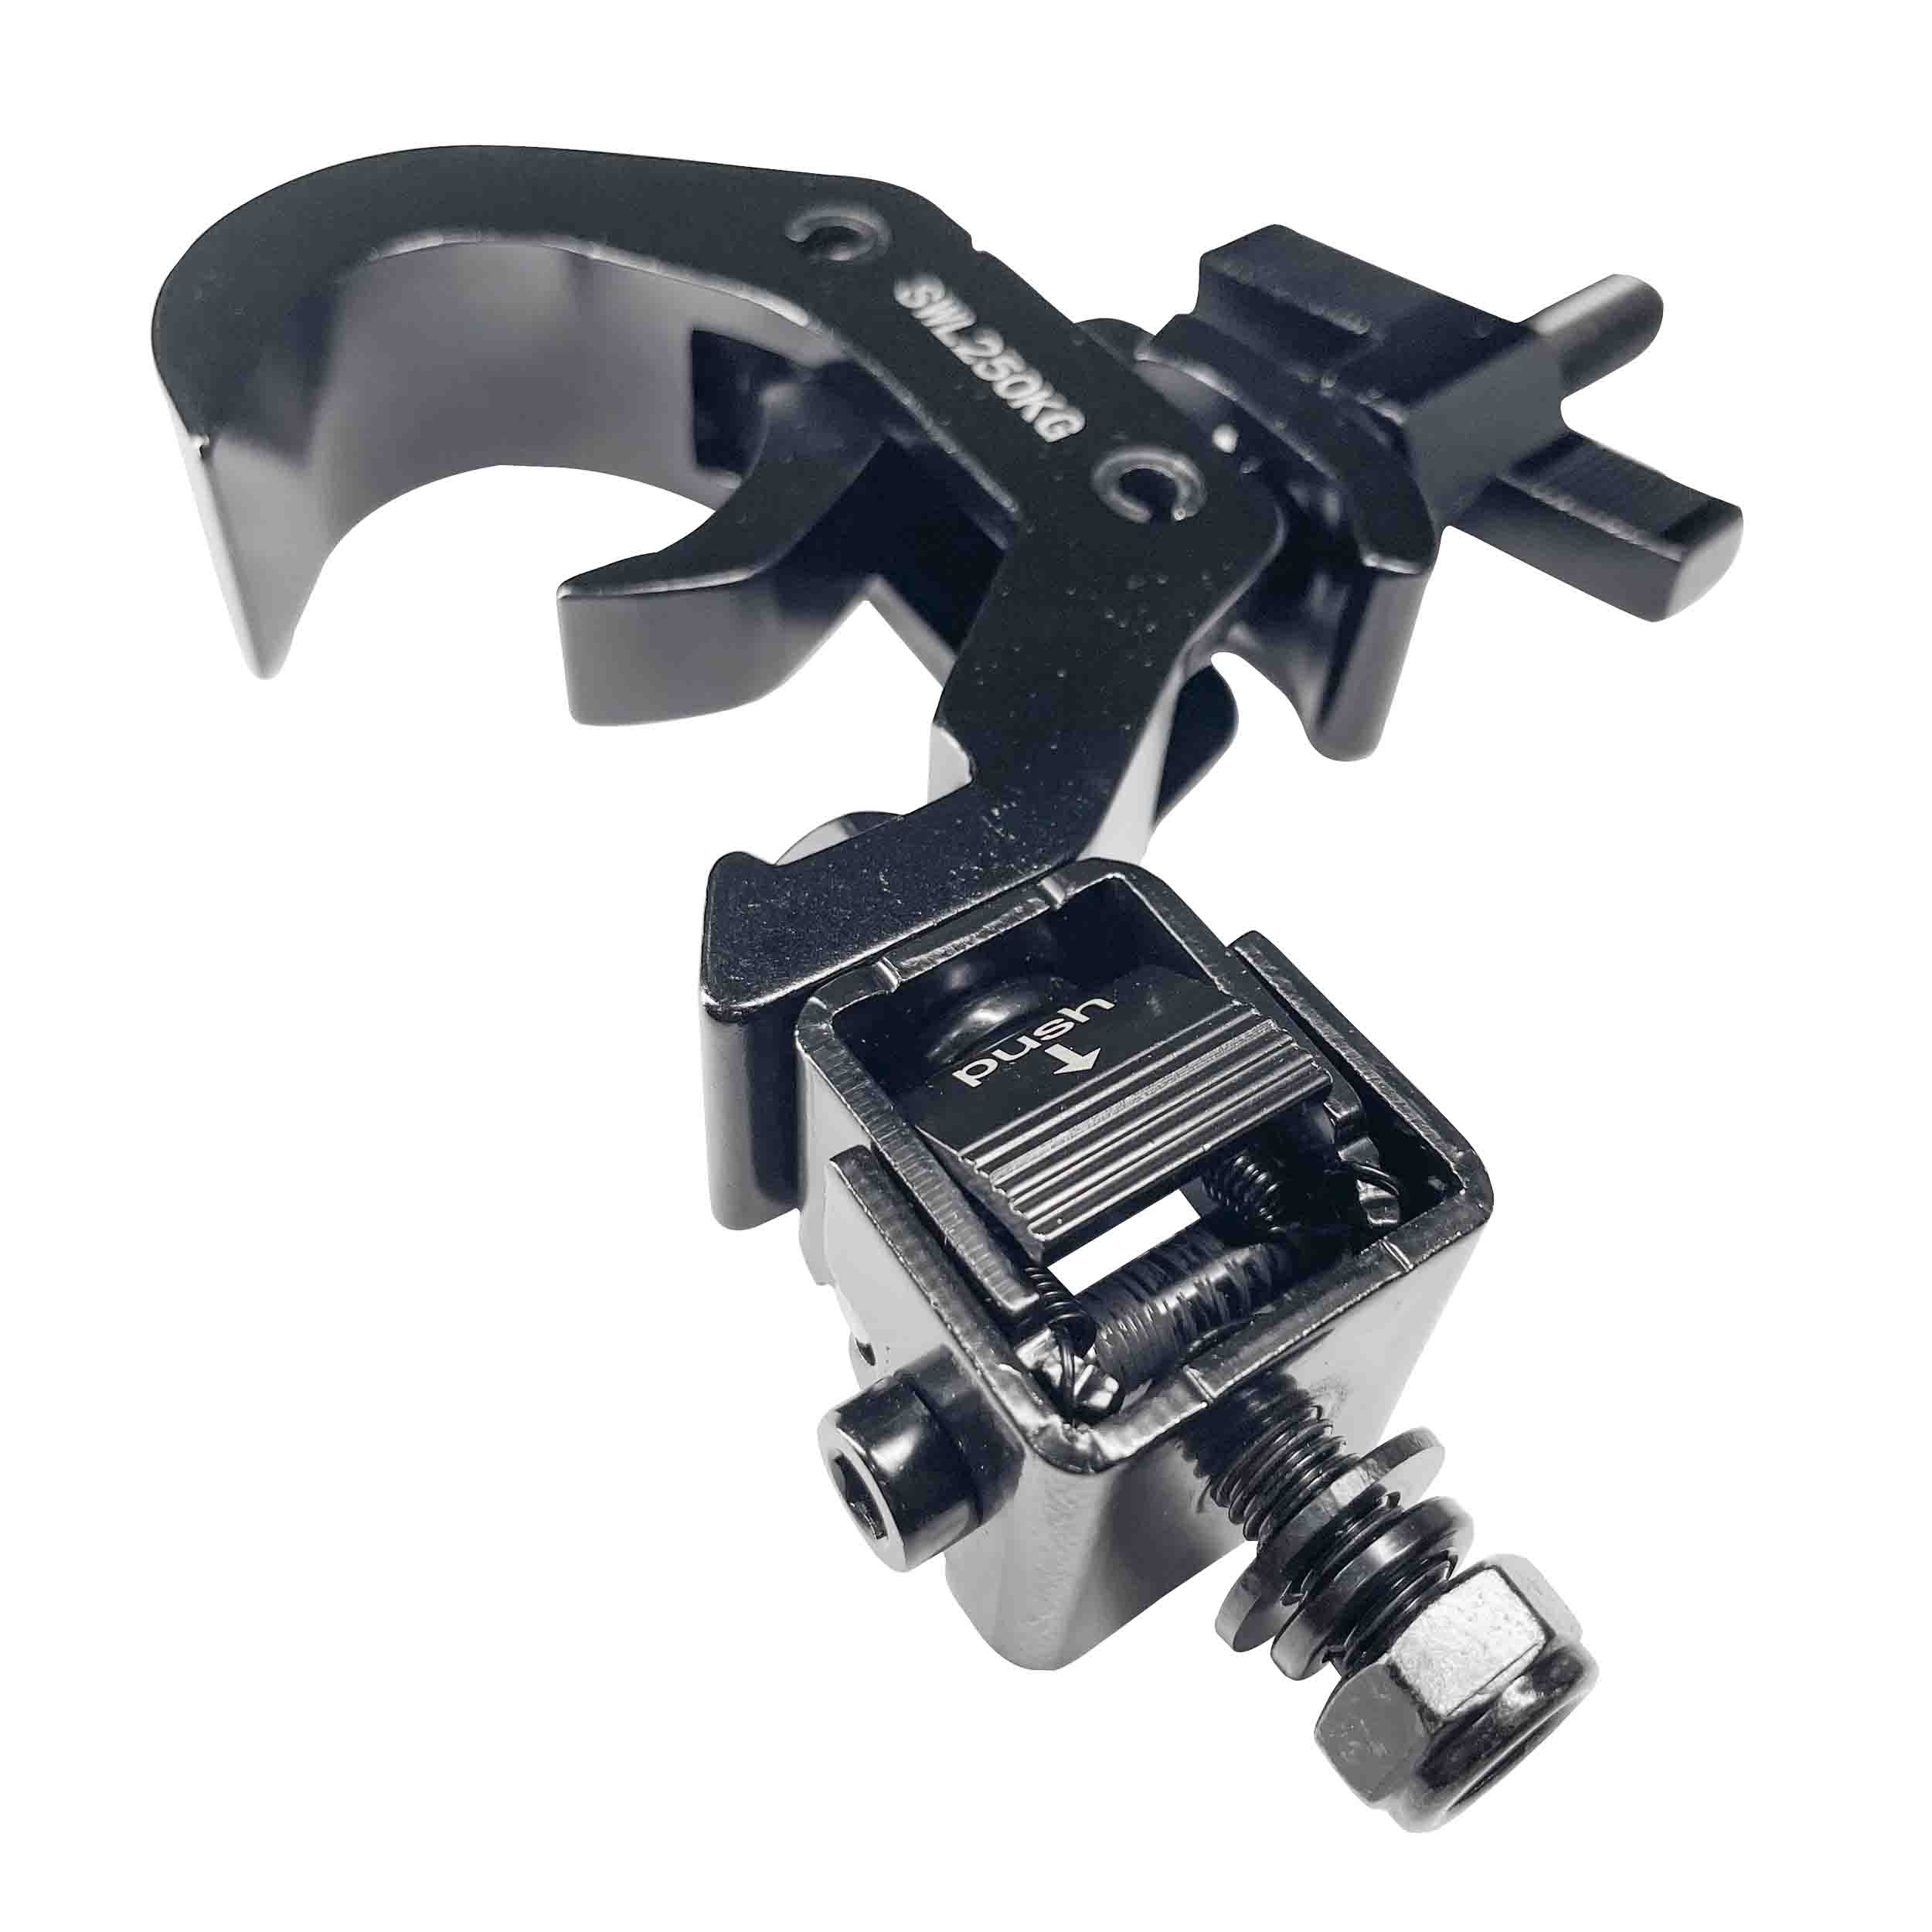 ProX T-QFC12X4, 4 Set Quick 90º Folding Clamp Adapters with T-C12 Truss Clamp 2 in Diameter - Black Finish - Hollywood DJ